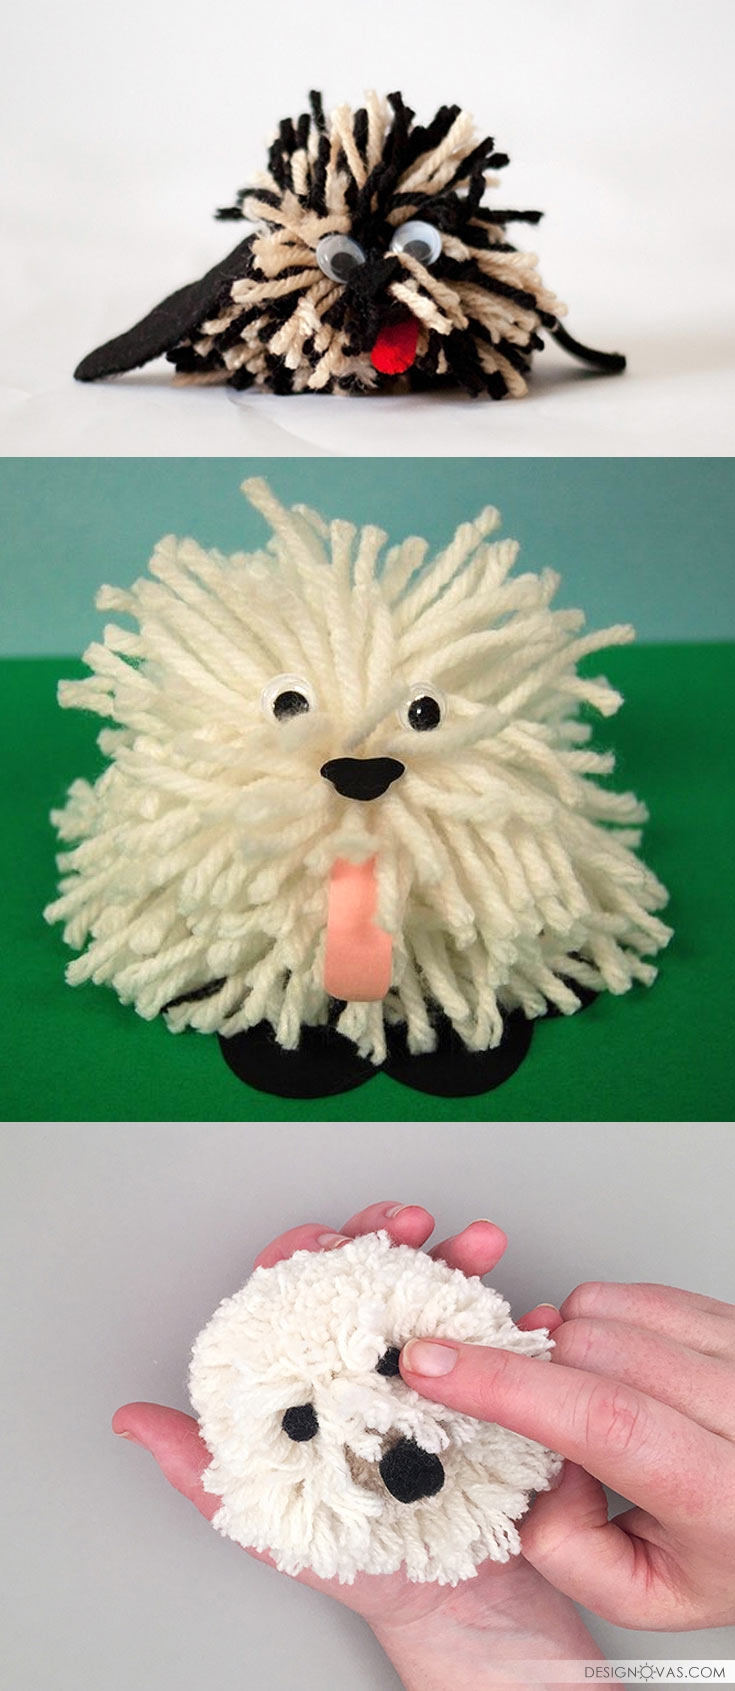 26 animal crafts you can make with your kids ⋆ Page 5 of 27 ⋆ Cool home